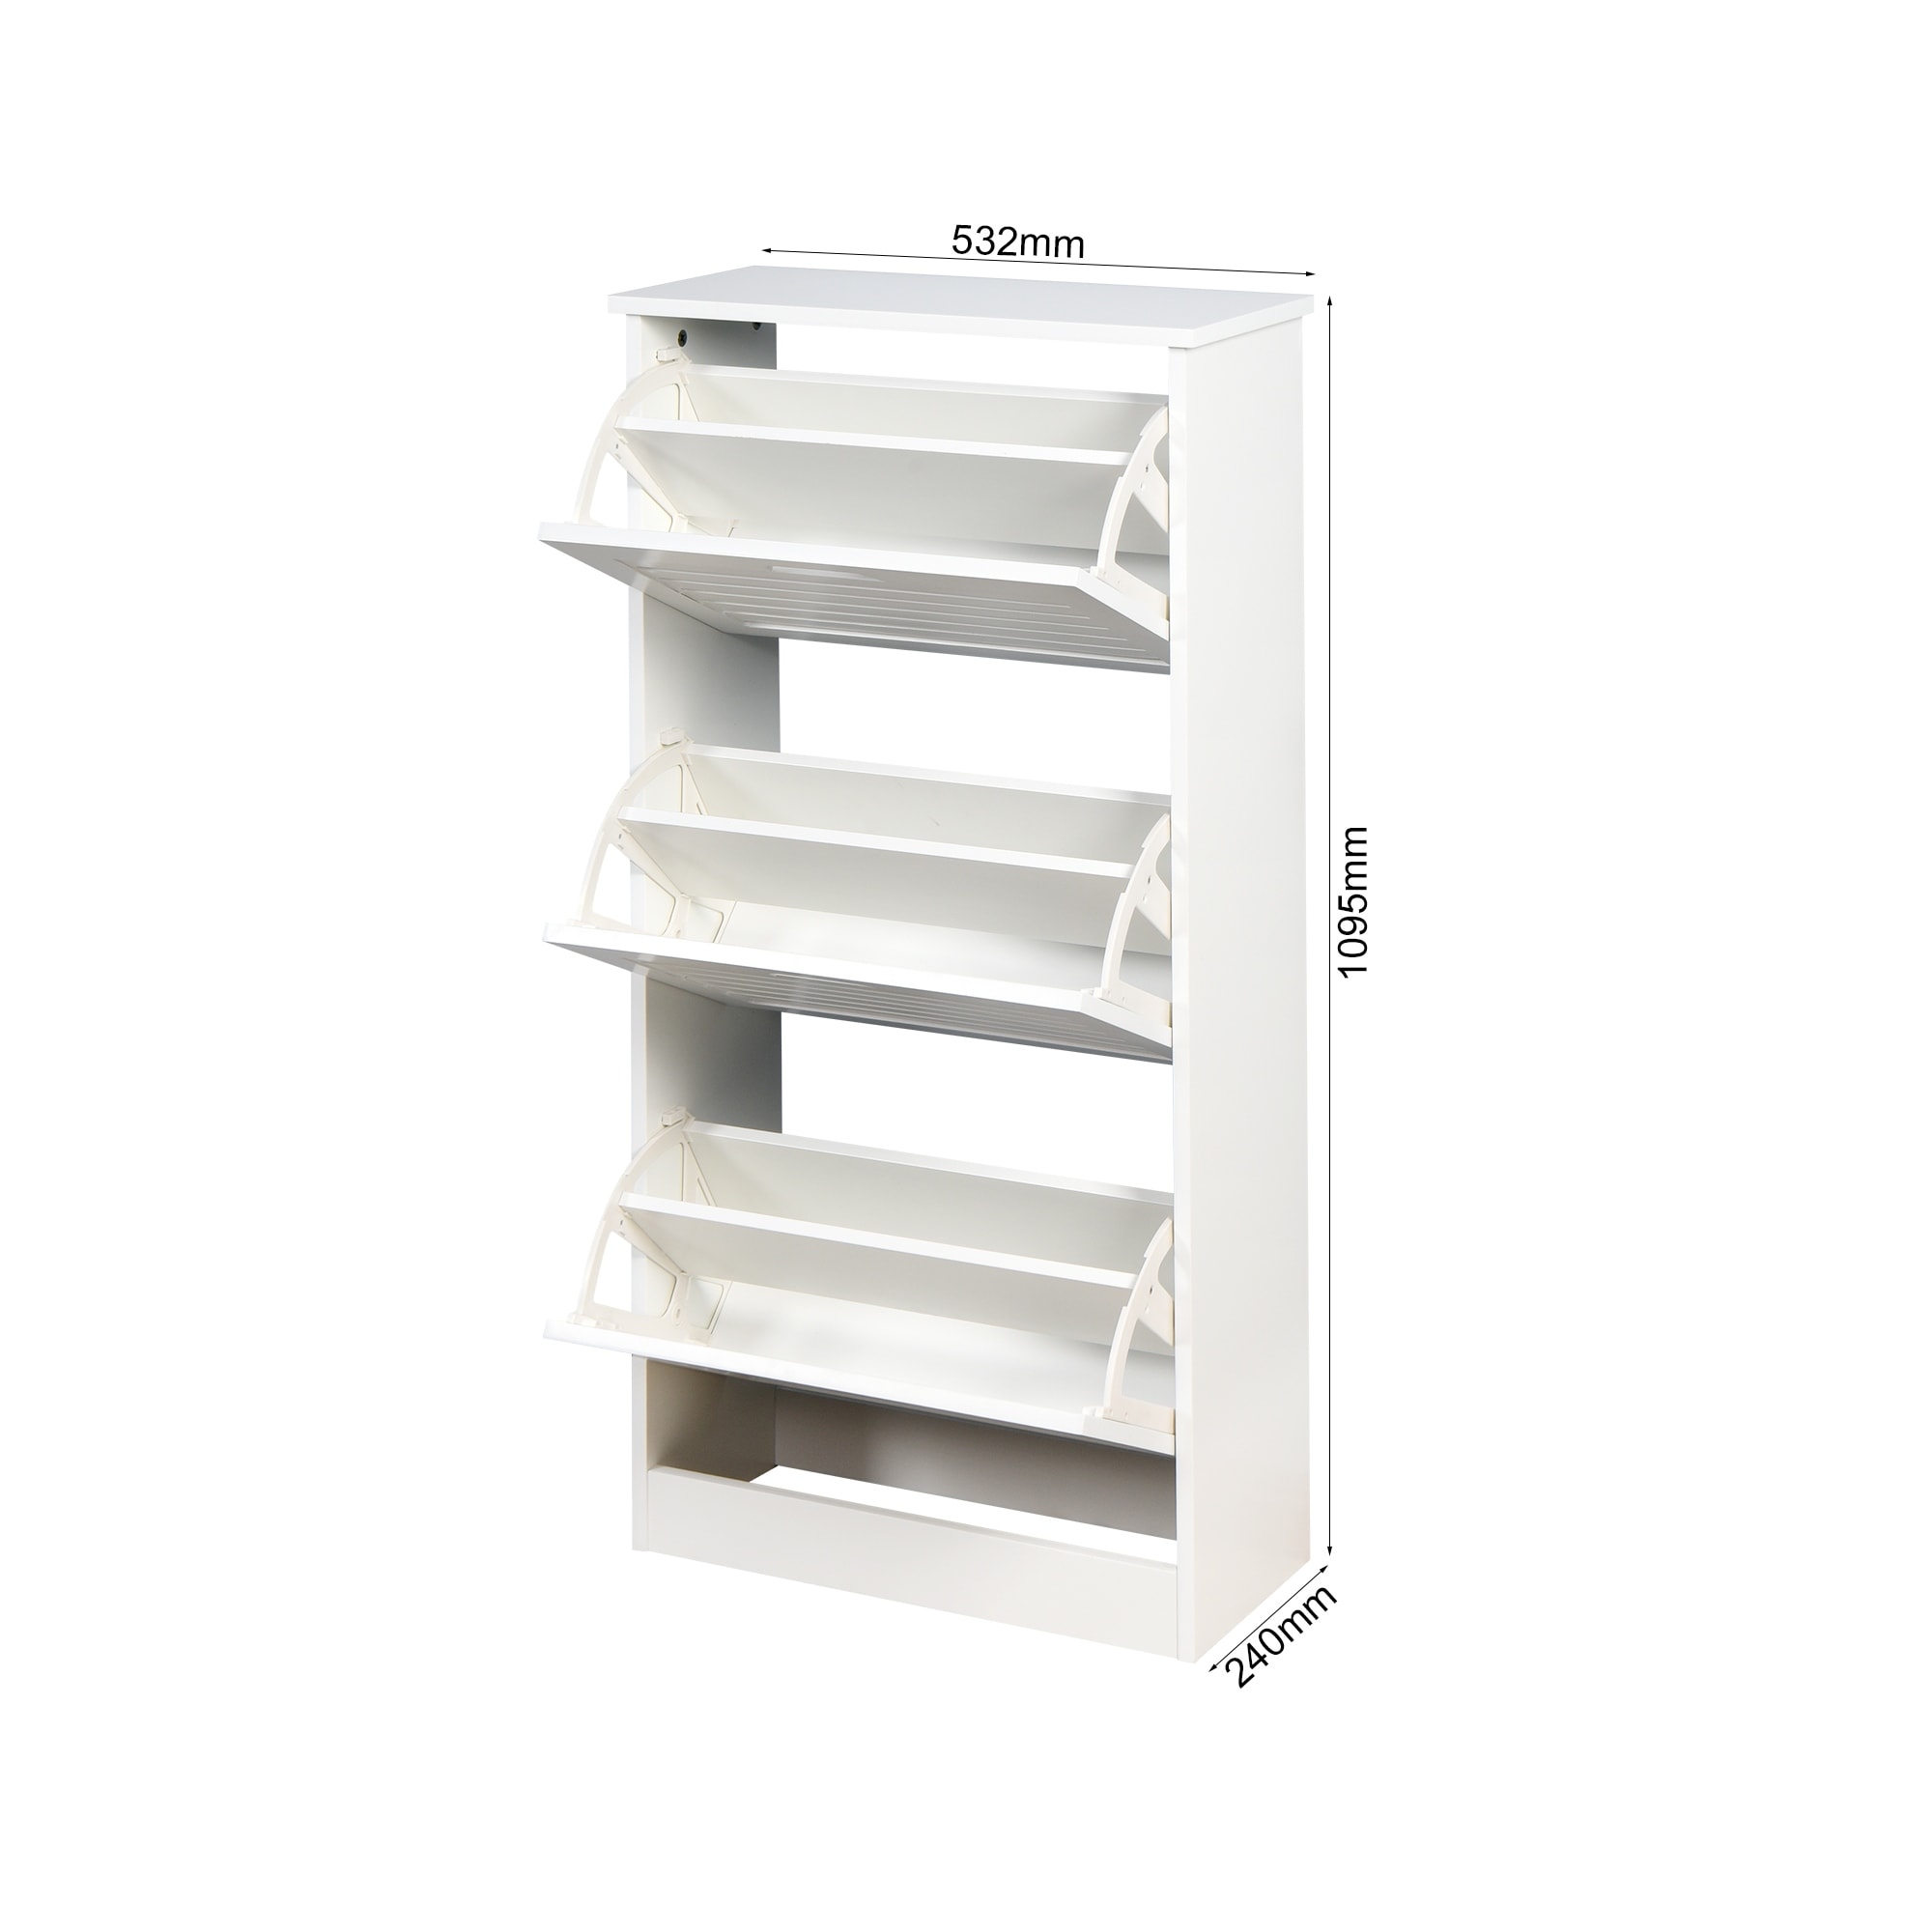 https://ak1.ostkcdn.com/images/products/is/images/direct/3f6aabb4592e9d06208c8adb23917a92d173af54/White-Wood-12-Pair-Shoe-Storage-Cabinet.jpg